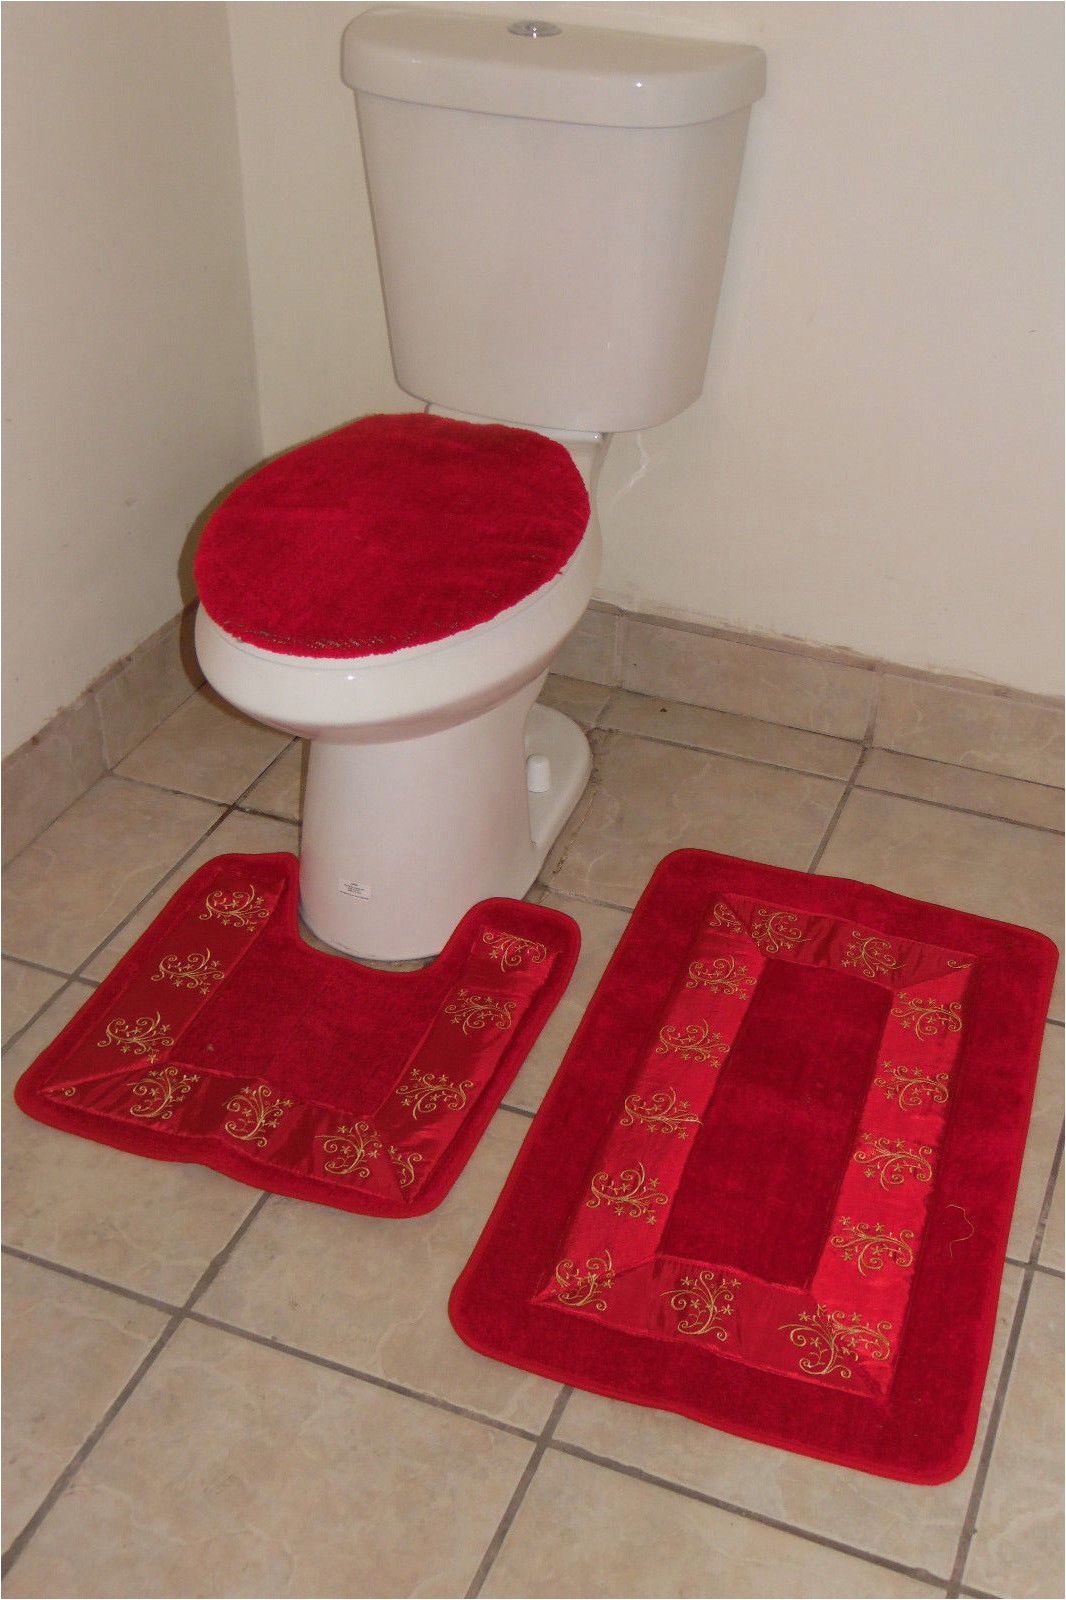 Bathroom Contour toilet Rugs Bathmats Rugs and toilet Covers 3pc 5 Red Bathroom